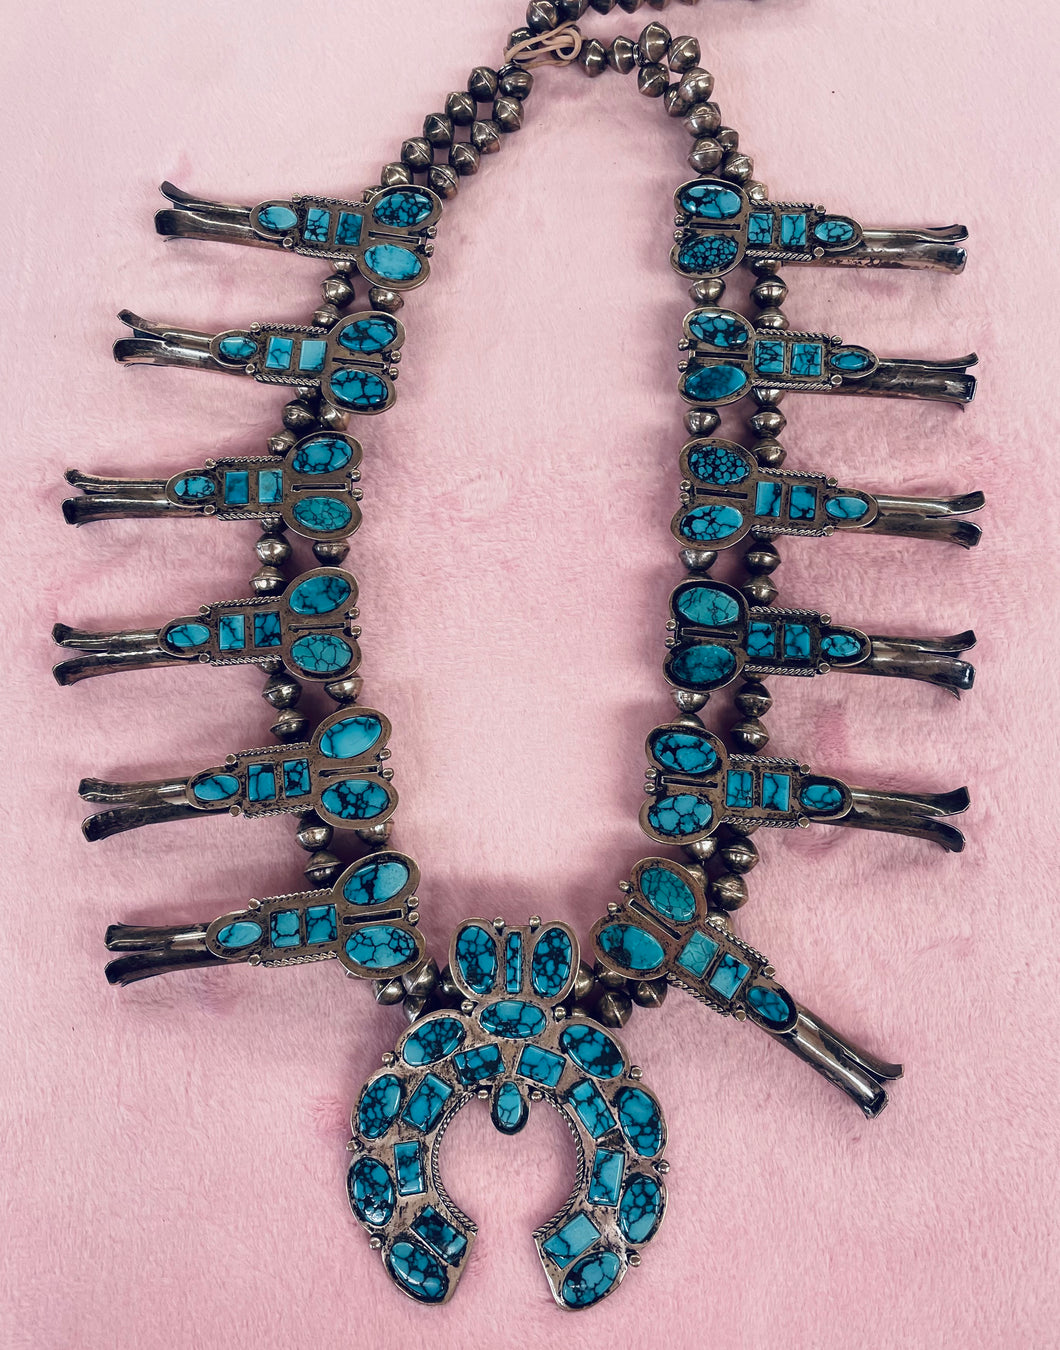 Vintage Turquoise and Silver Squash Blossom Necklace